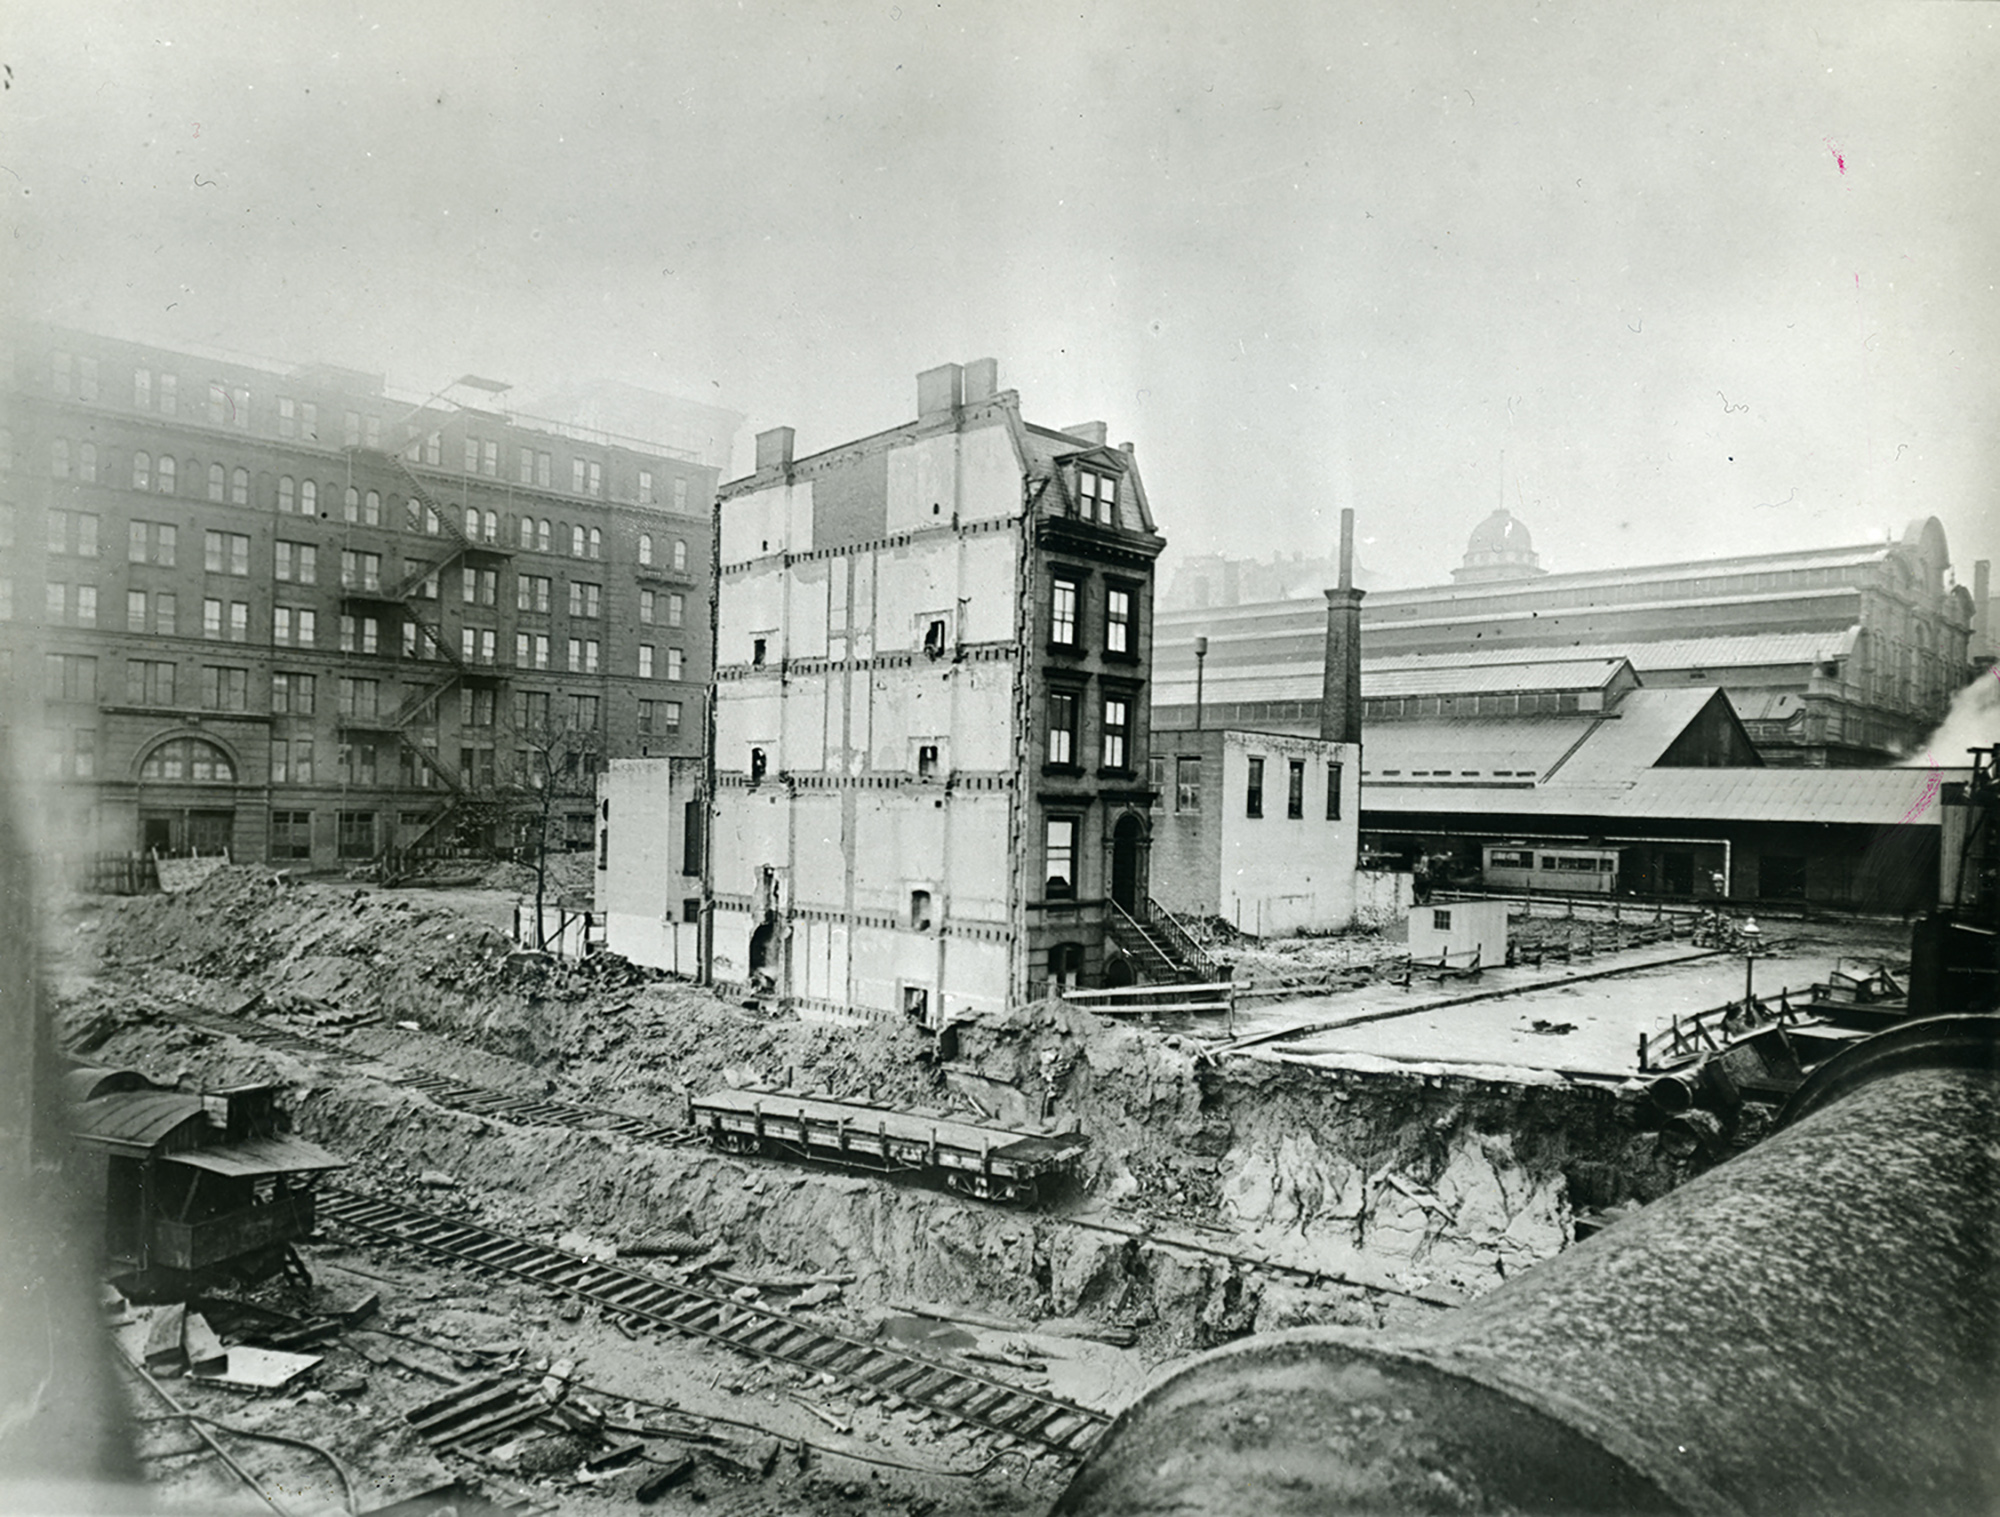 Razing brownstones for Grand Central Terminal, 1906